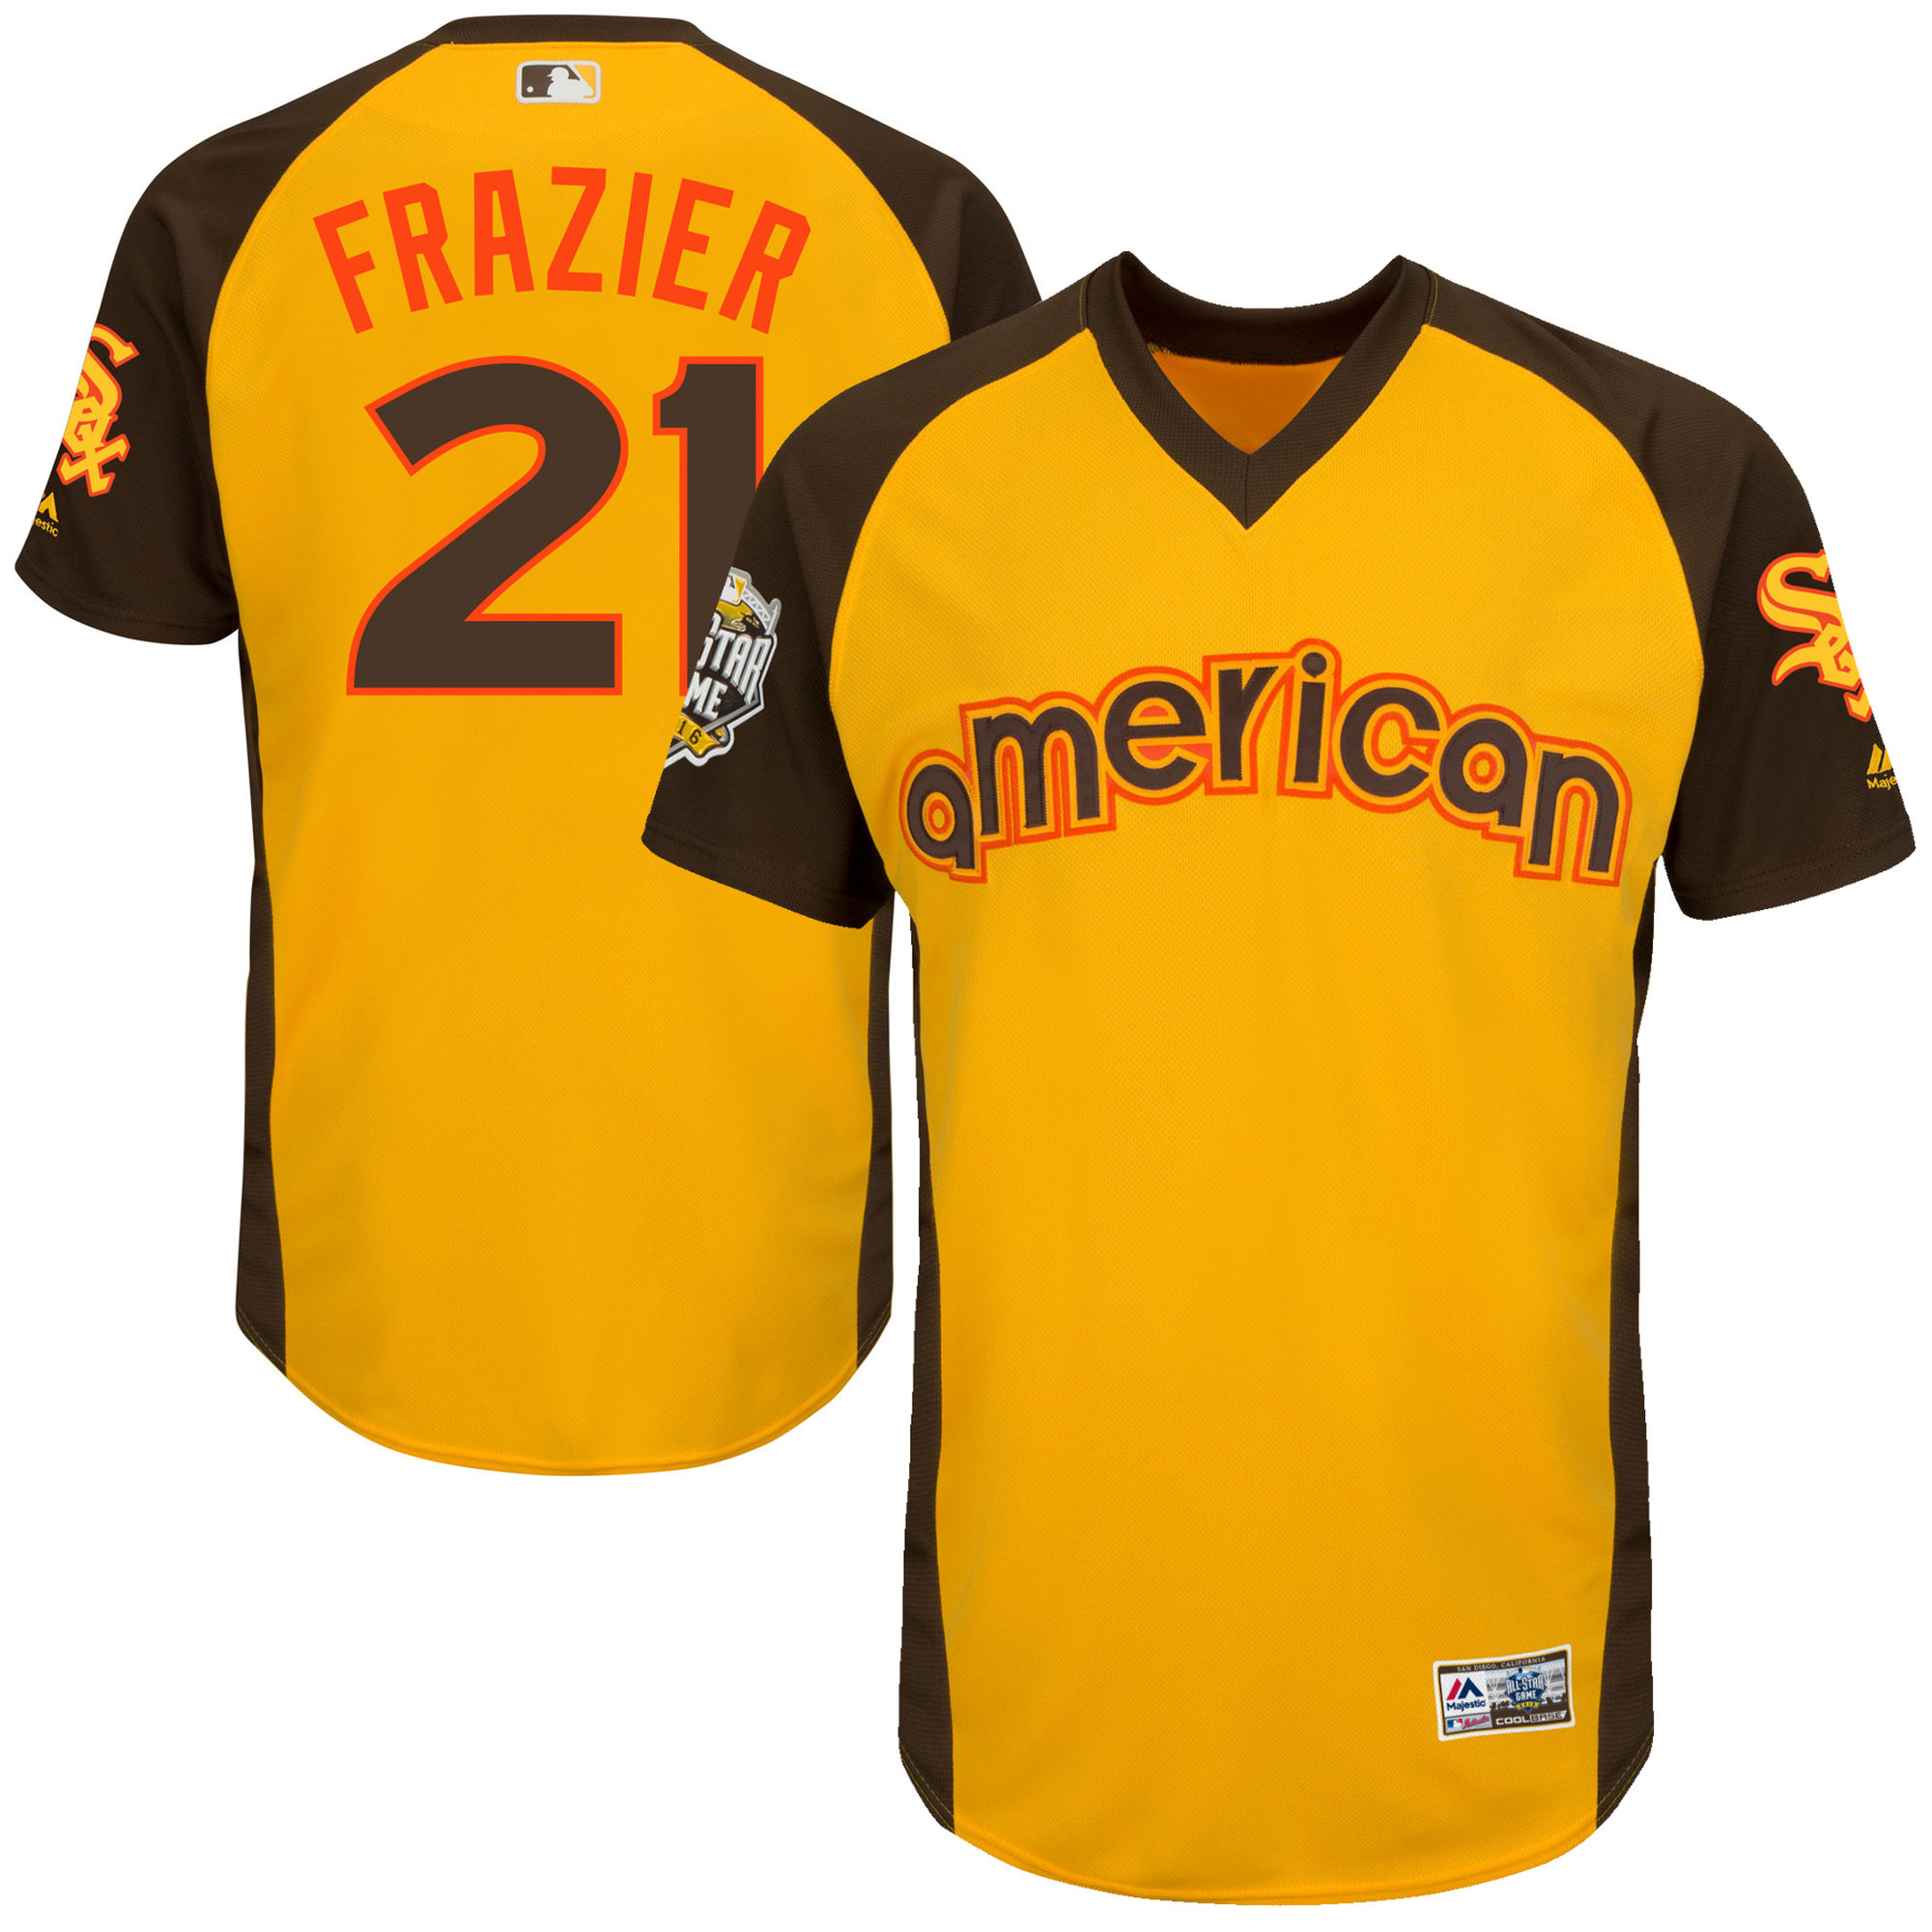 White Sox 21 Todd Frazier Yellow 2016 All-Star Game Cool Base Batting Practice Player Jersey